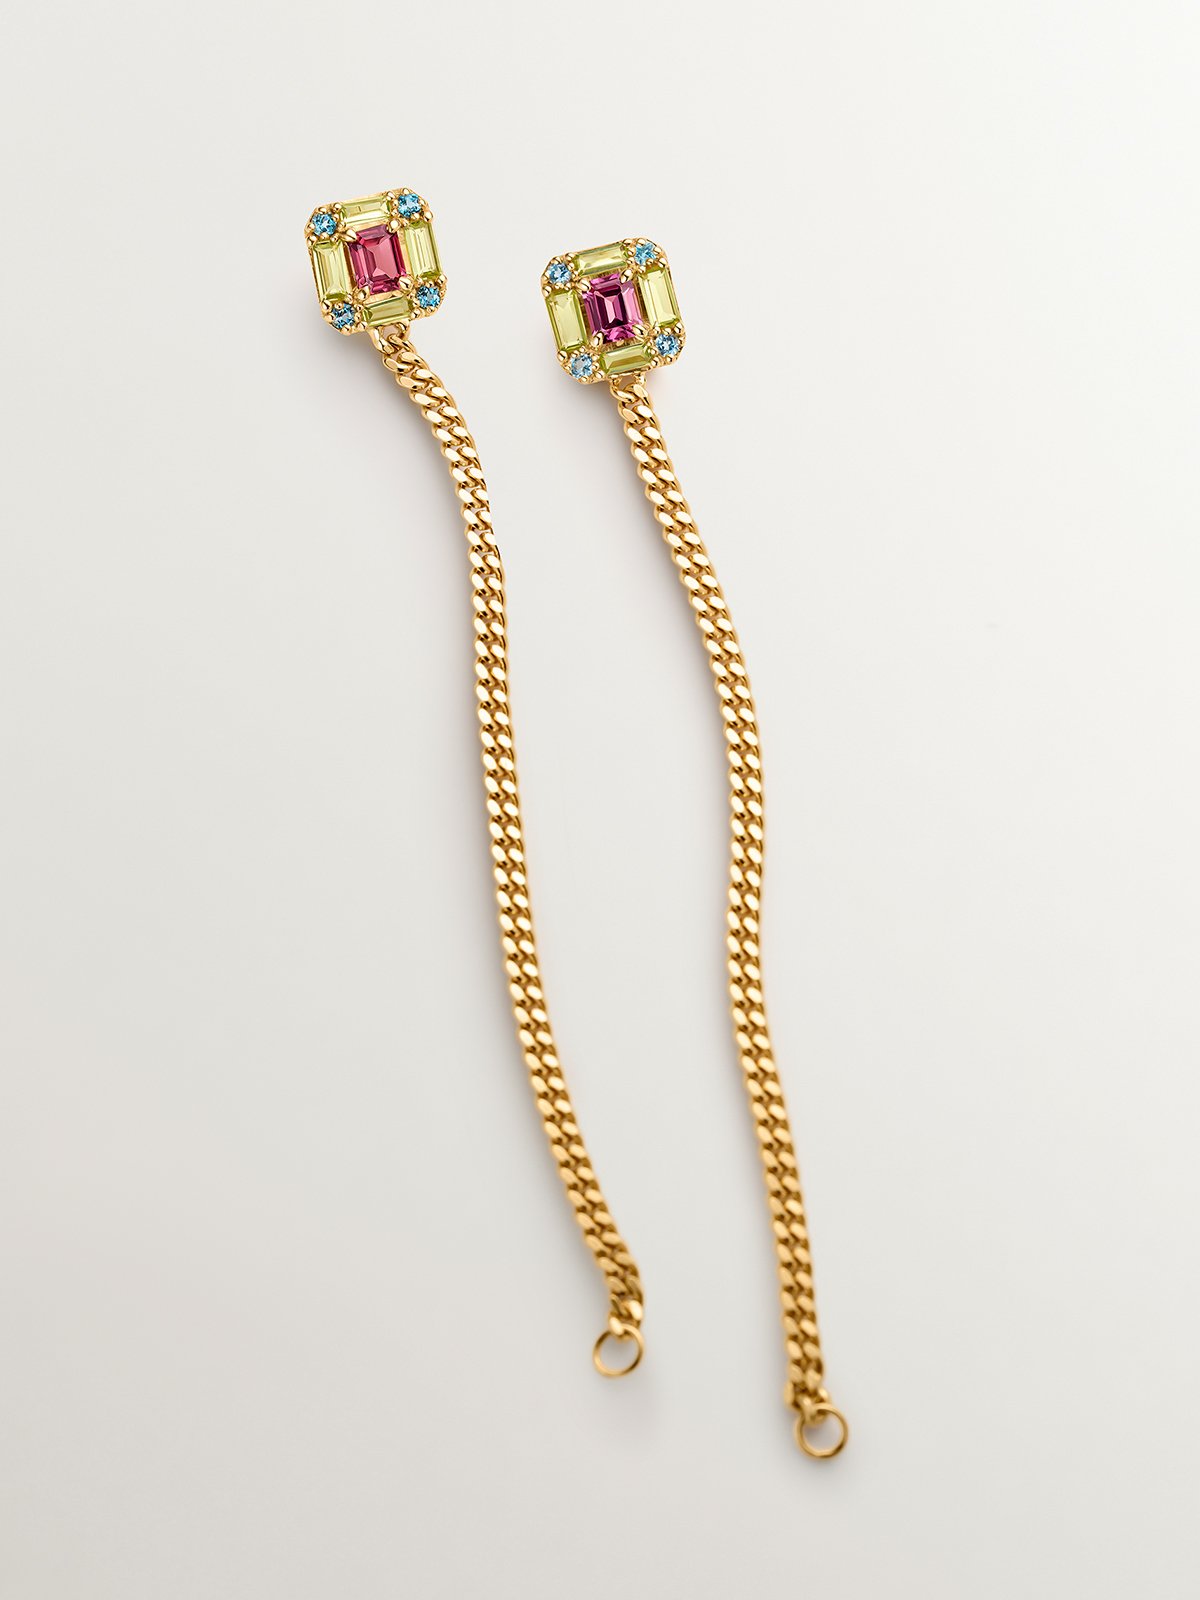 Long earrings with 925 silver chain coated in 18K yellow gold with peridots, topazes and rhodolites.